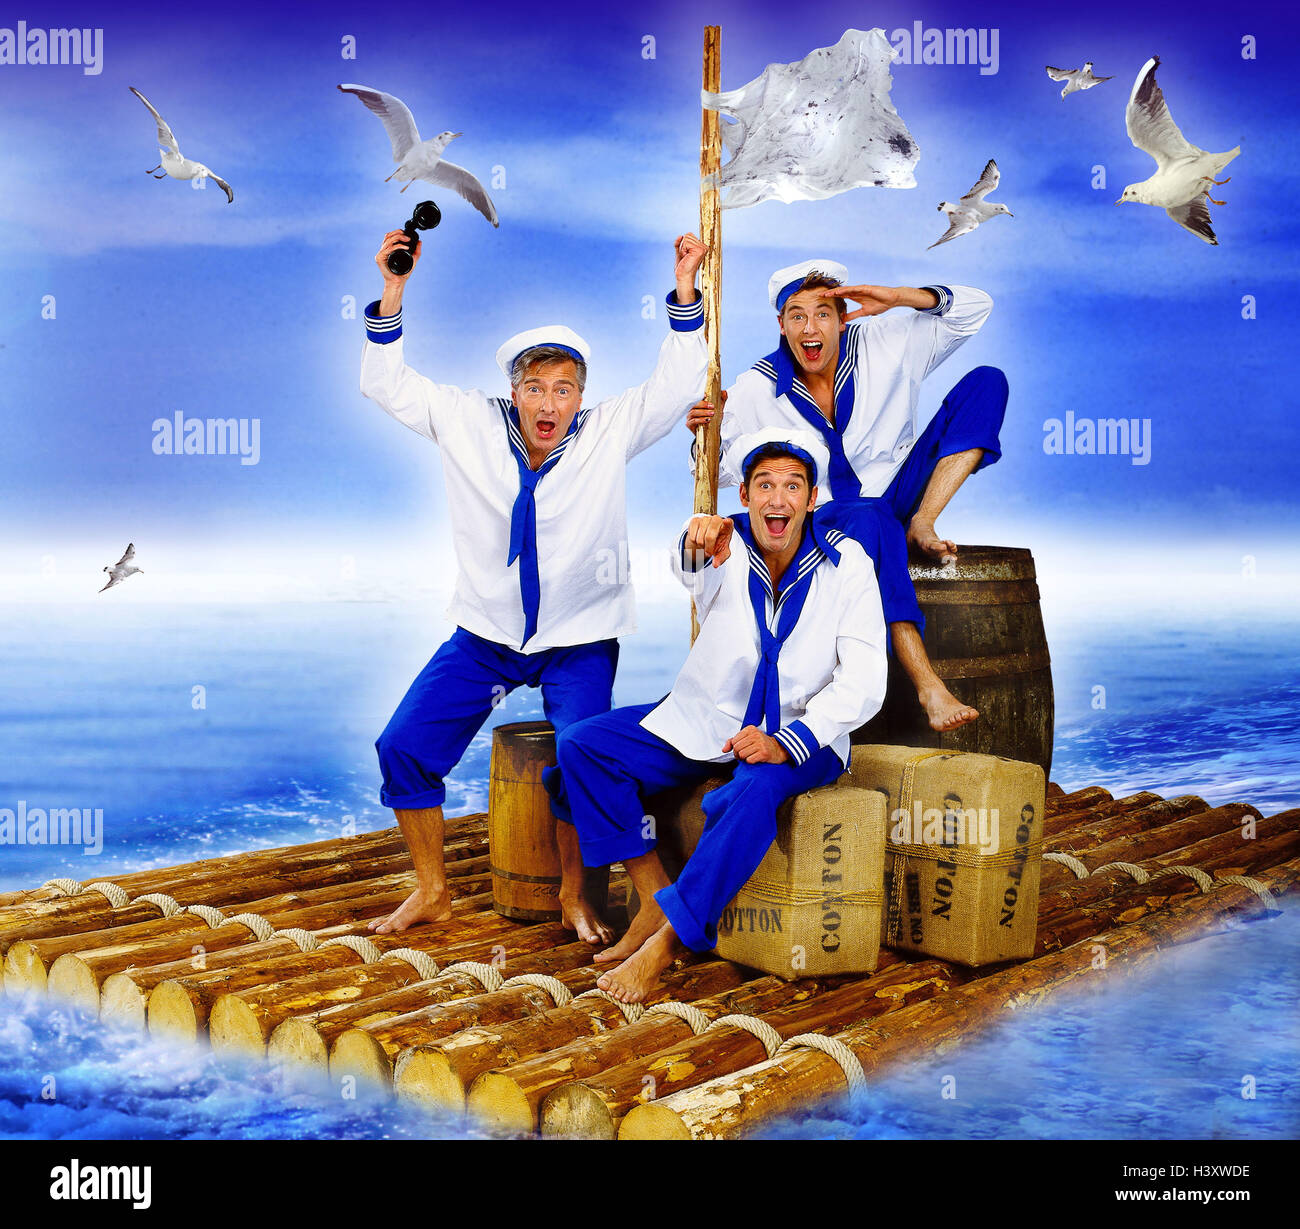 Composing, sea, raft, sailor, sea need, gesture, indicate, country, rescue, cheering, joy Men, man, sailor, men, three, navigation, wreck, wooden raft, do, need, predicament, Odyssey, help, country, laugh, happy, relief, gulls Stock Photo